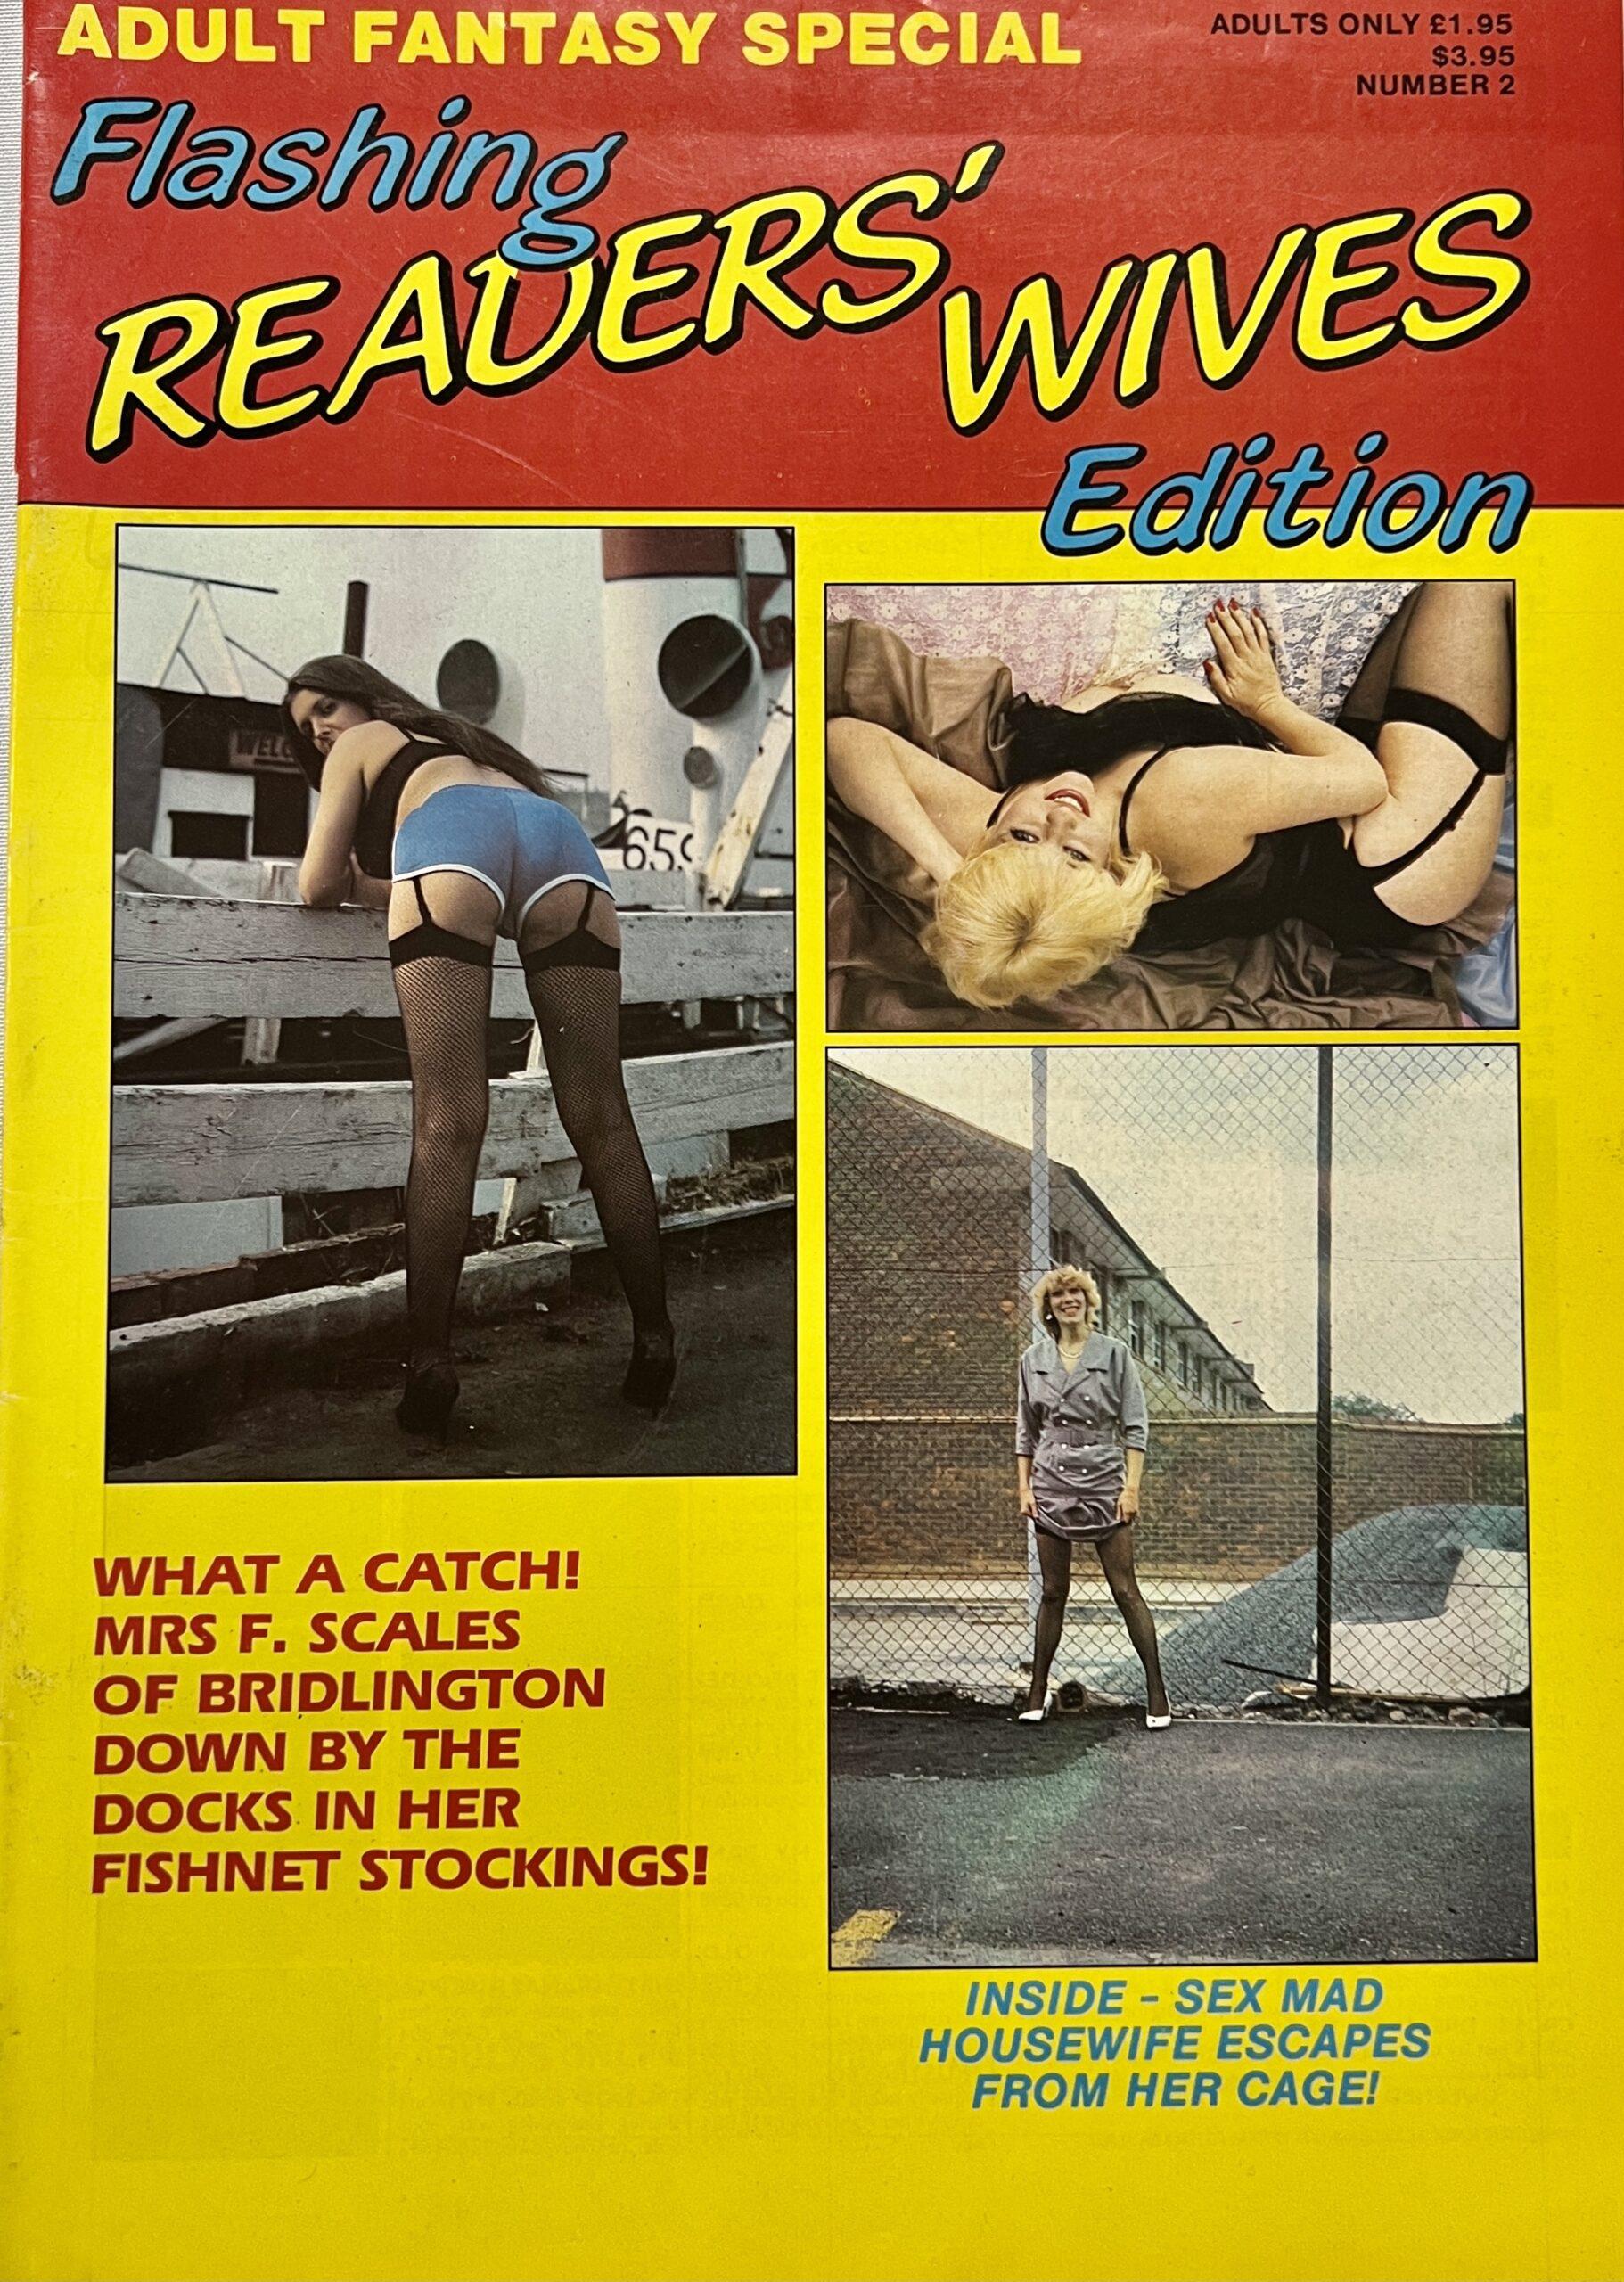 Flashing Readers Wives Edition Adult Fantasy Special #2 80S UK Magazine pic